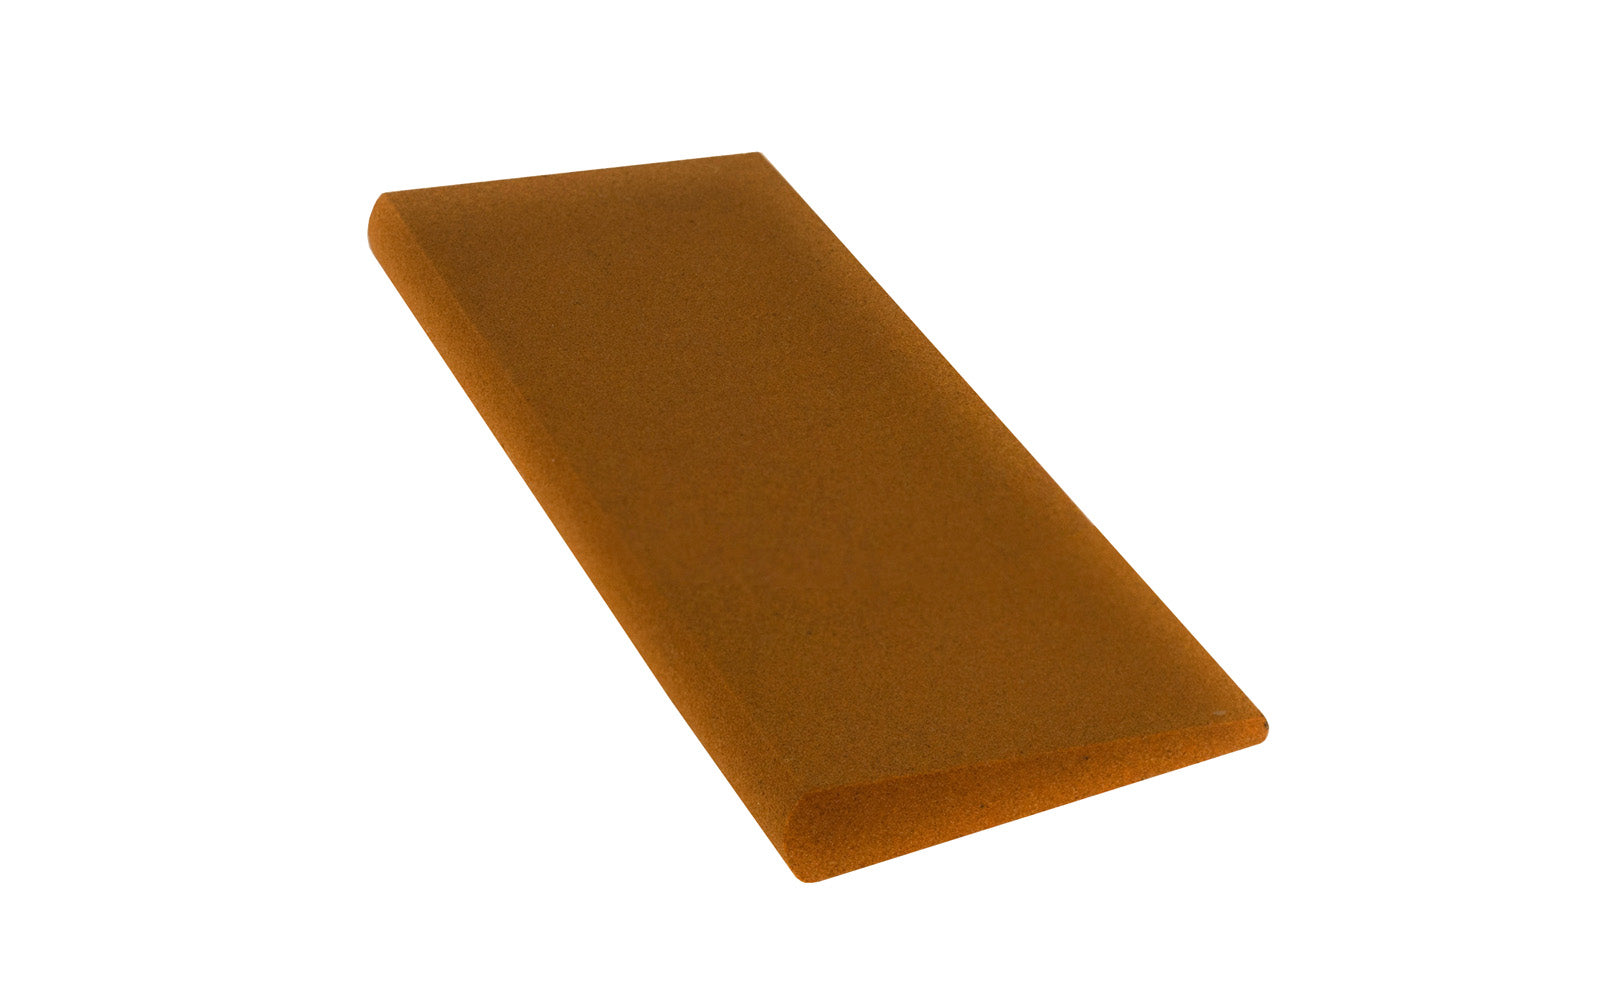 Norton Round Edge Medium India Slip Stone with medium grit aluminum oxide abrasive. To improve sharpening & reduce clogging, use with oil. Great for sharpening carving tools & gouges. 4-1/2" length  x  1-3/4" width  -  3/8" x 1/8" round edge radius. Oilstone made by Norton, Saint Gobain. Model MS34. Made in USA.